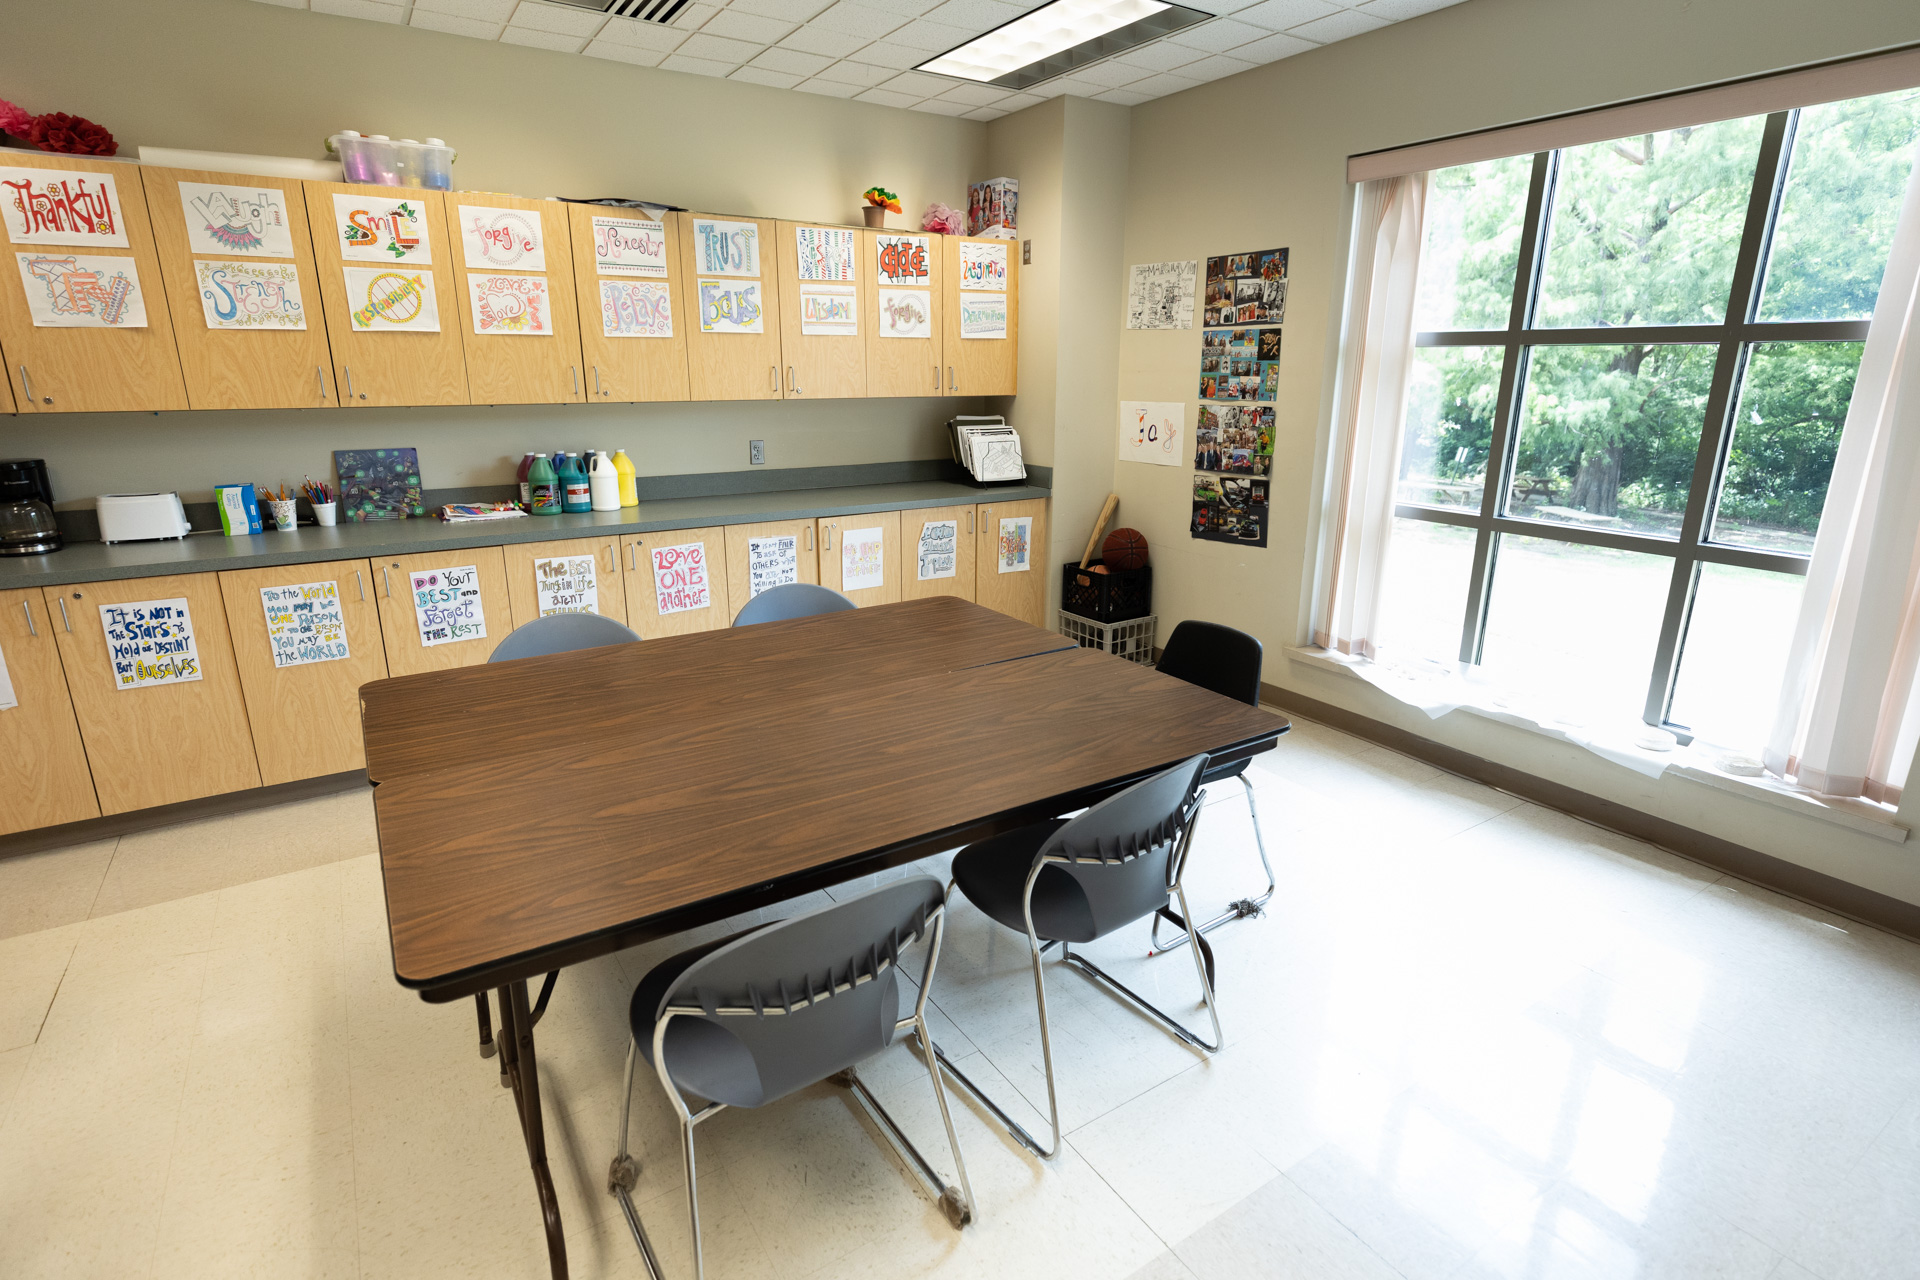 Inside classroom. Many cabinets at back of room with artwork. Large window on right side of room and image. Five-person table in center of room.